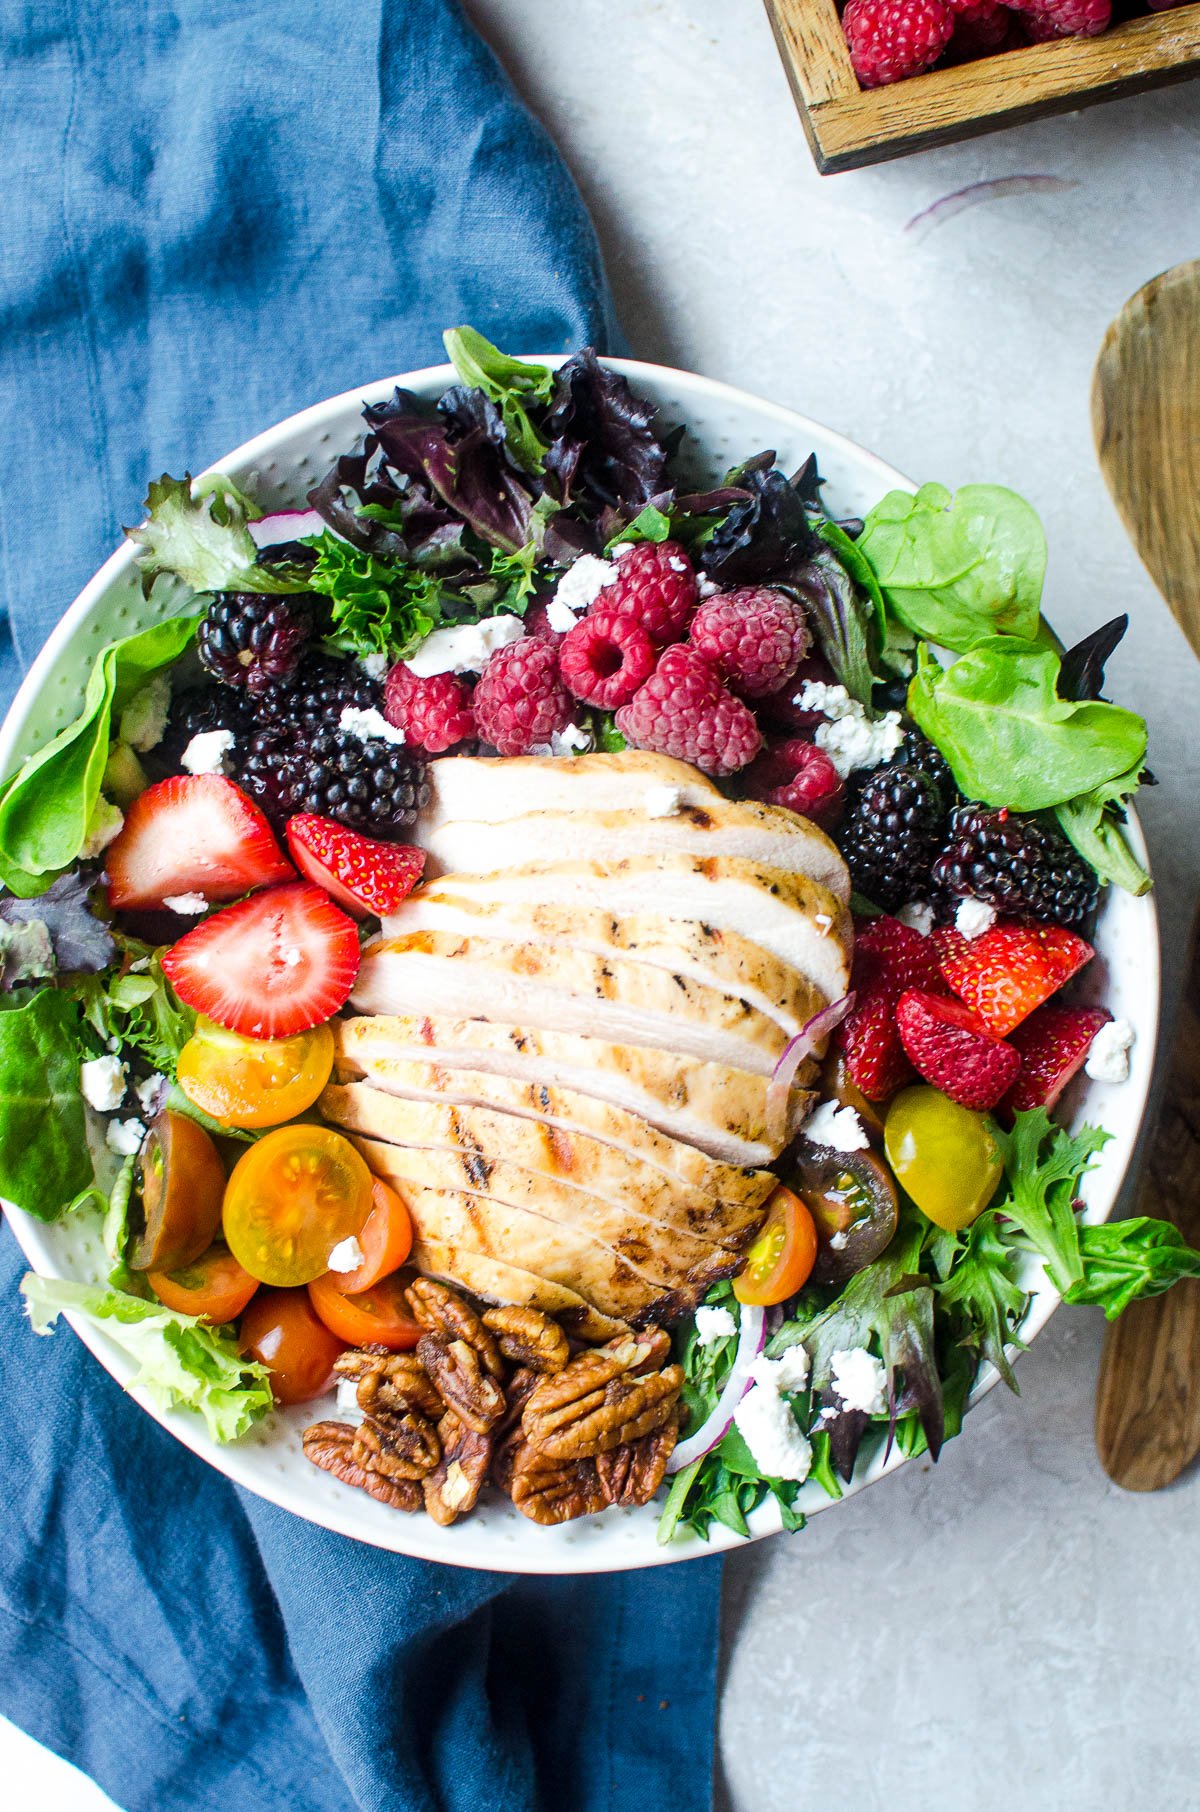 Overhead view of sliced grilled chicken in a bowl with salad greens, berries, and tomatoes.